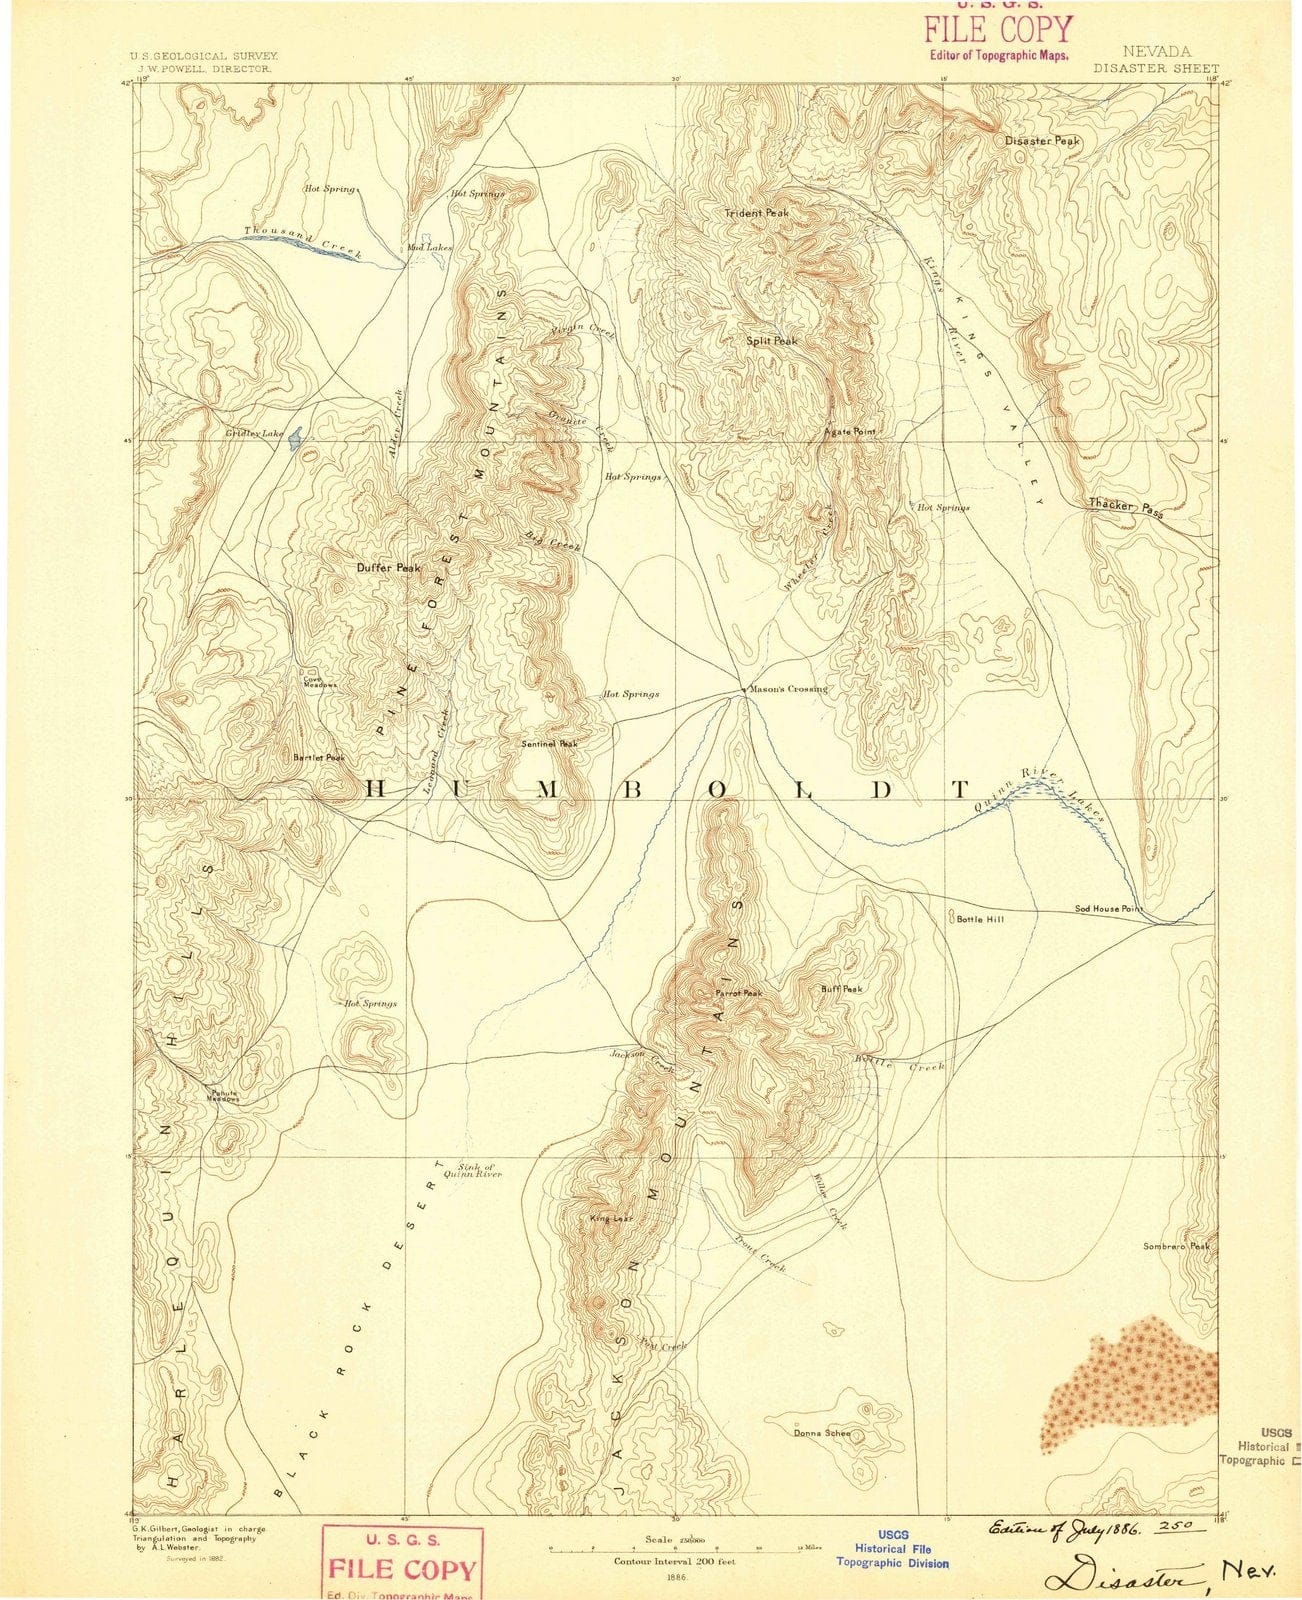 1886 Disaster, NV - Nevada - USGS Topographic Map | HistoricPictoric